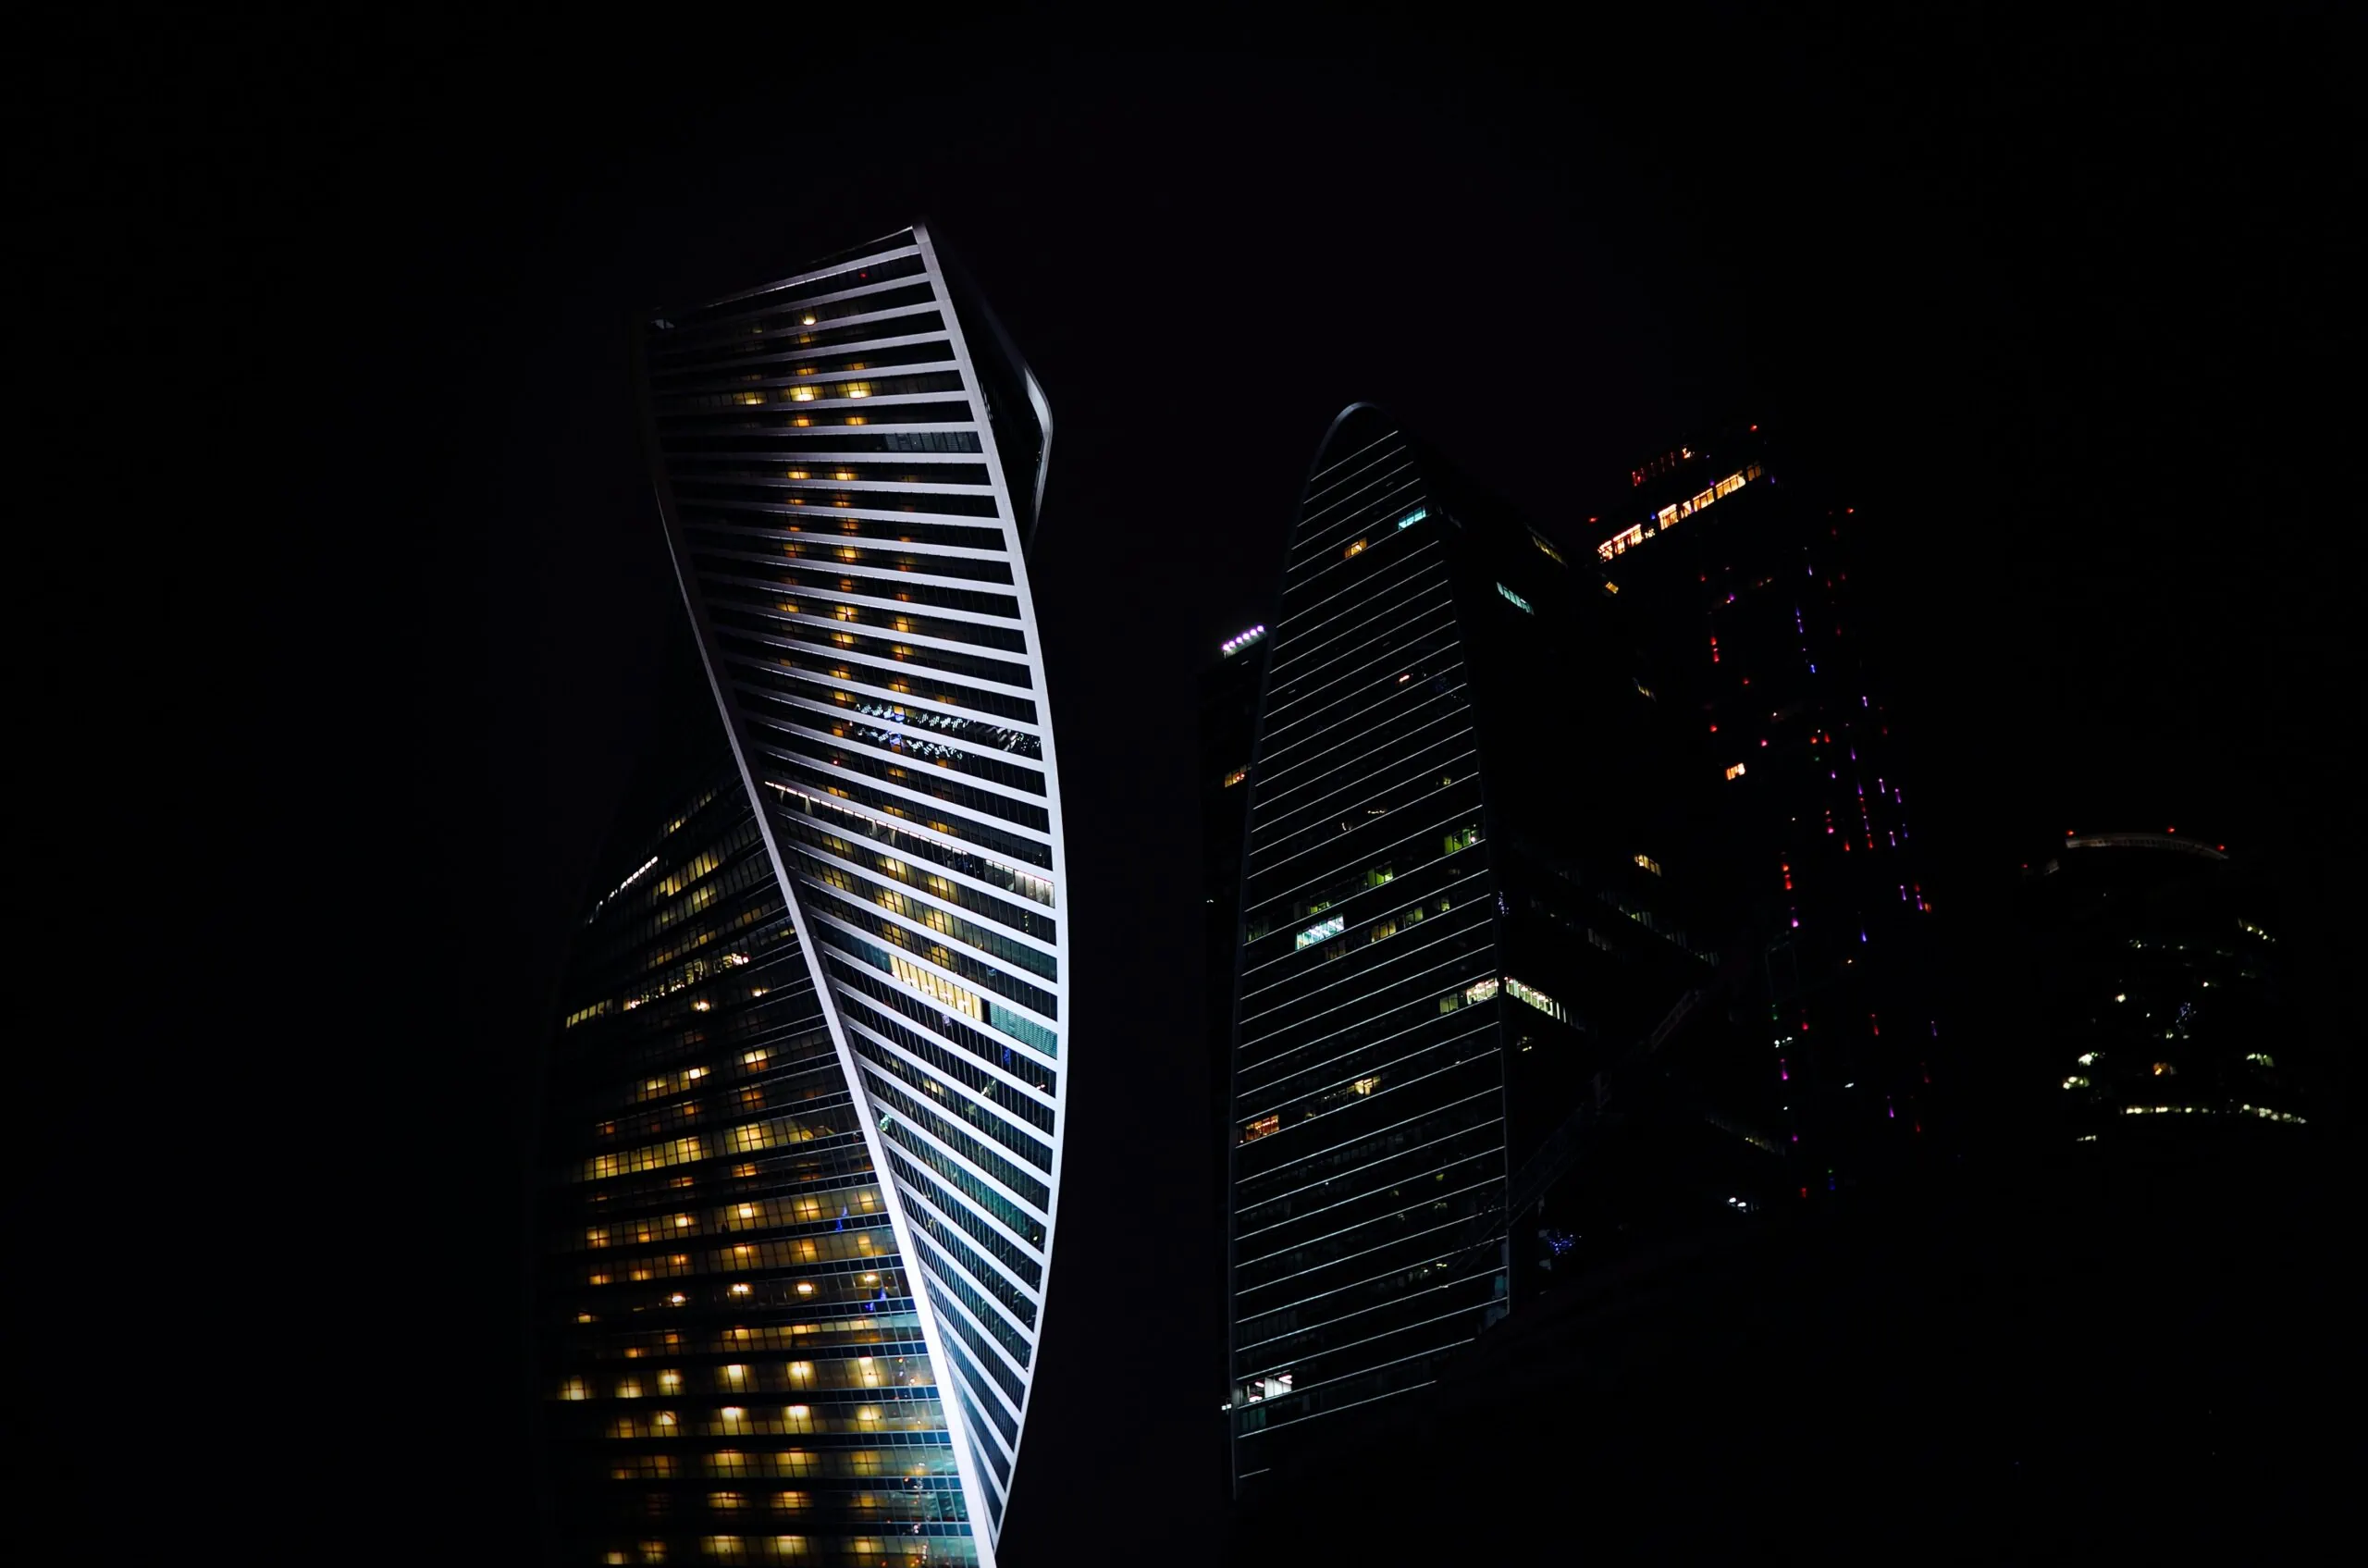 Business skyscrapers secure in dark lighting conditions with 4k surveillance cameras